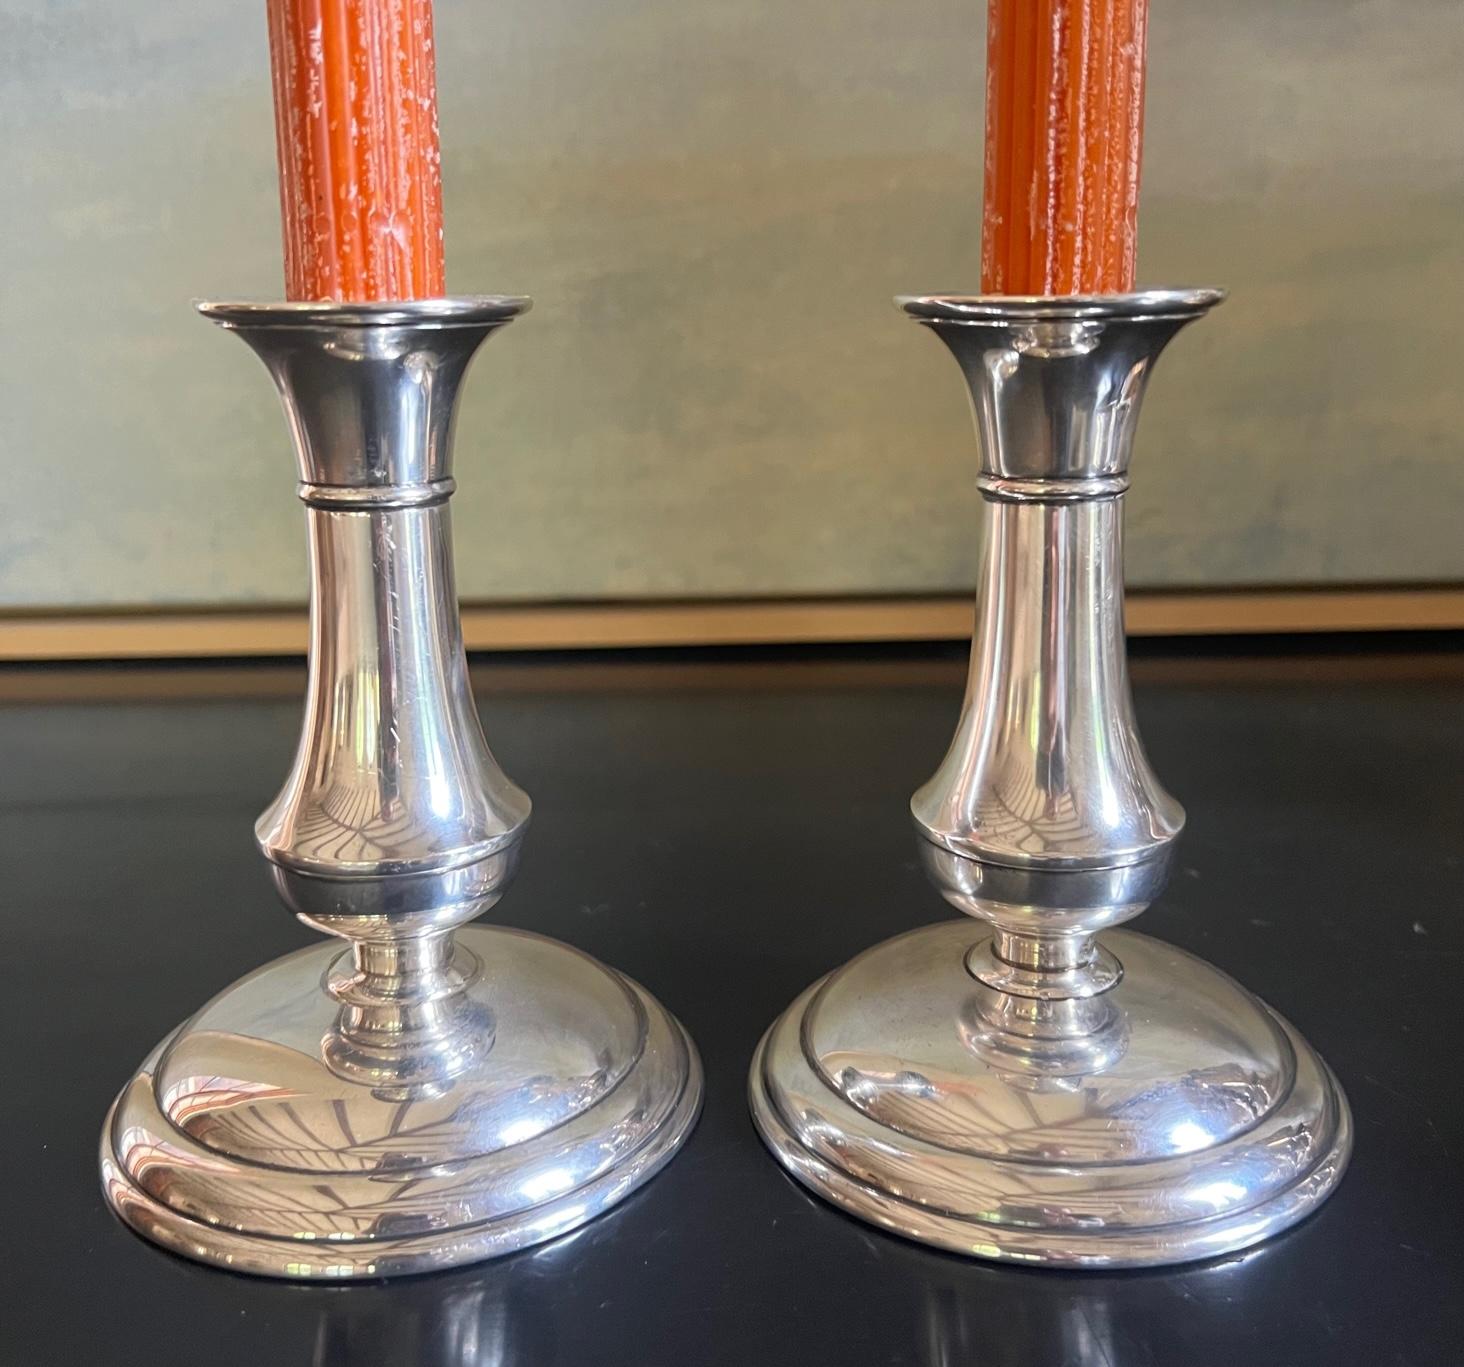 Cast Sterling Silver Candlesticks by Richard Dimes, Set of 2, C. 1910s